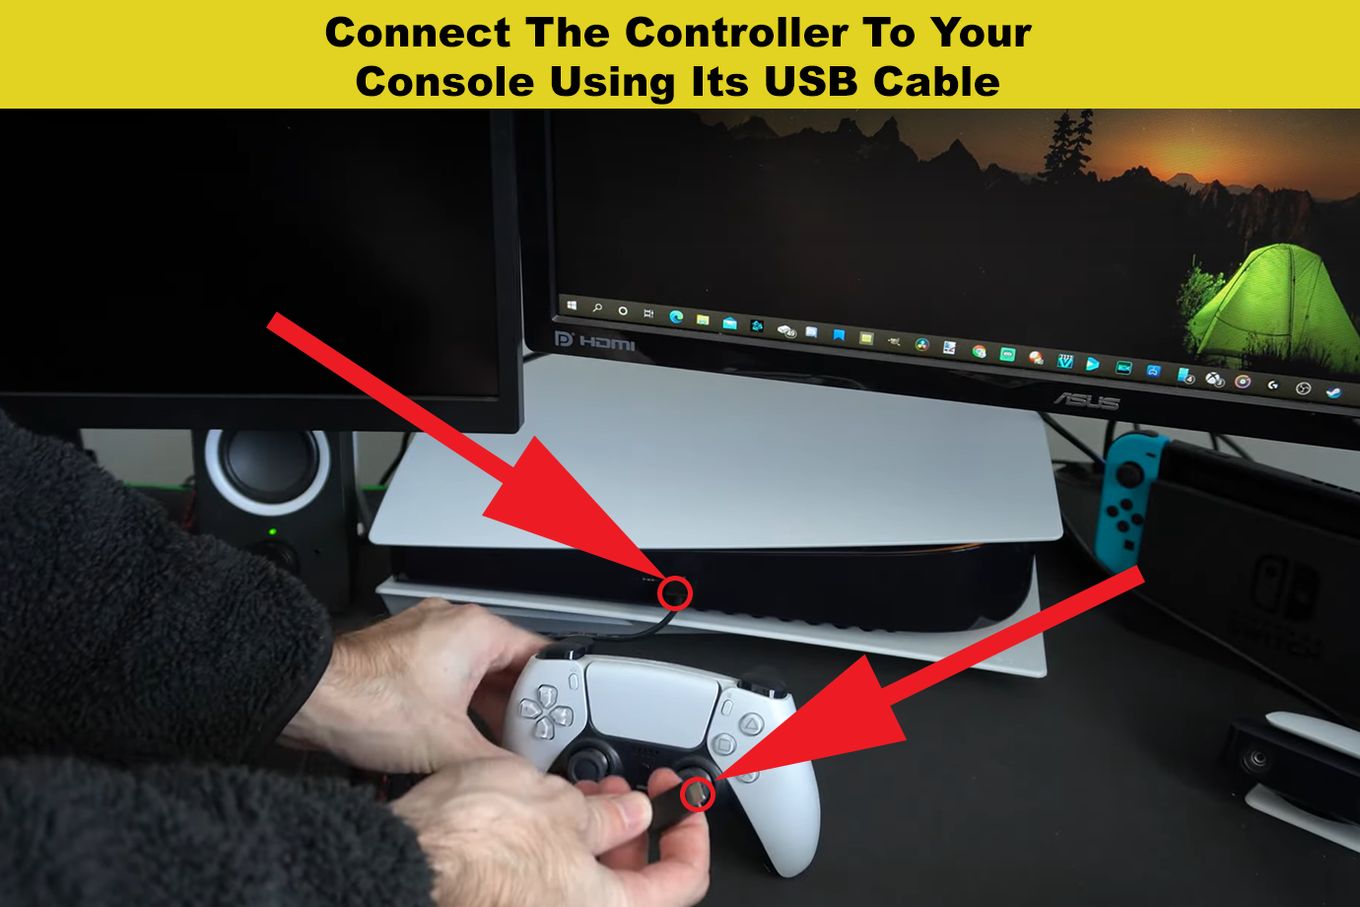 Connect the controller to the console using a USB cable.
Go to Settings on the console.